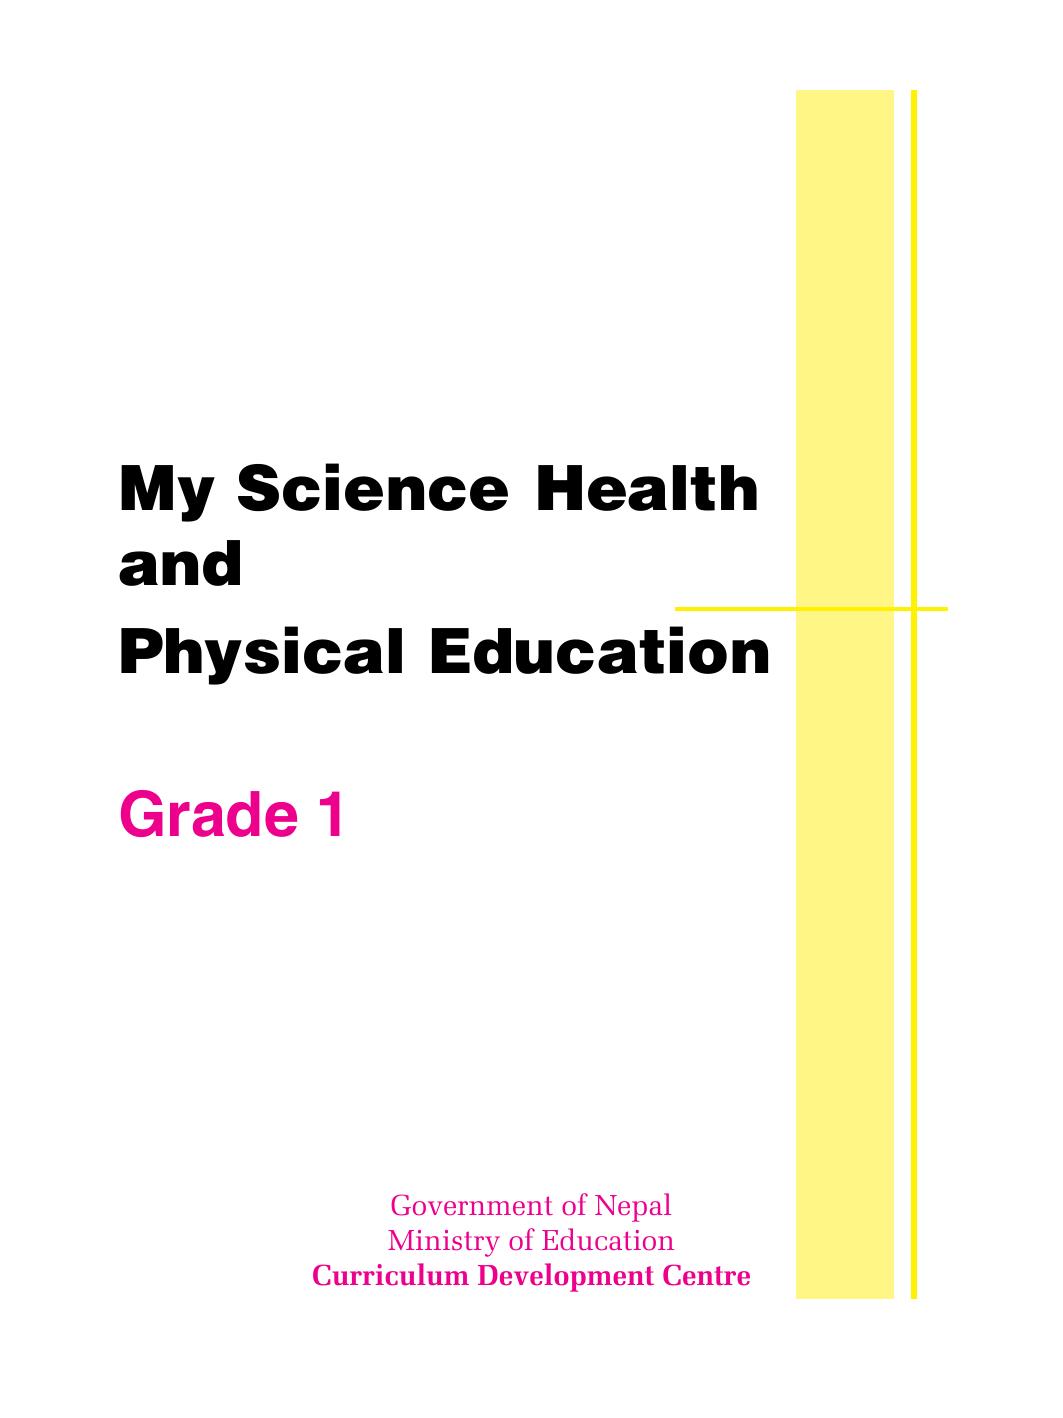 CDC 2075 - My Science Health and Physical Education Grade 1